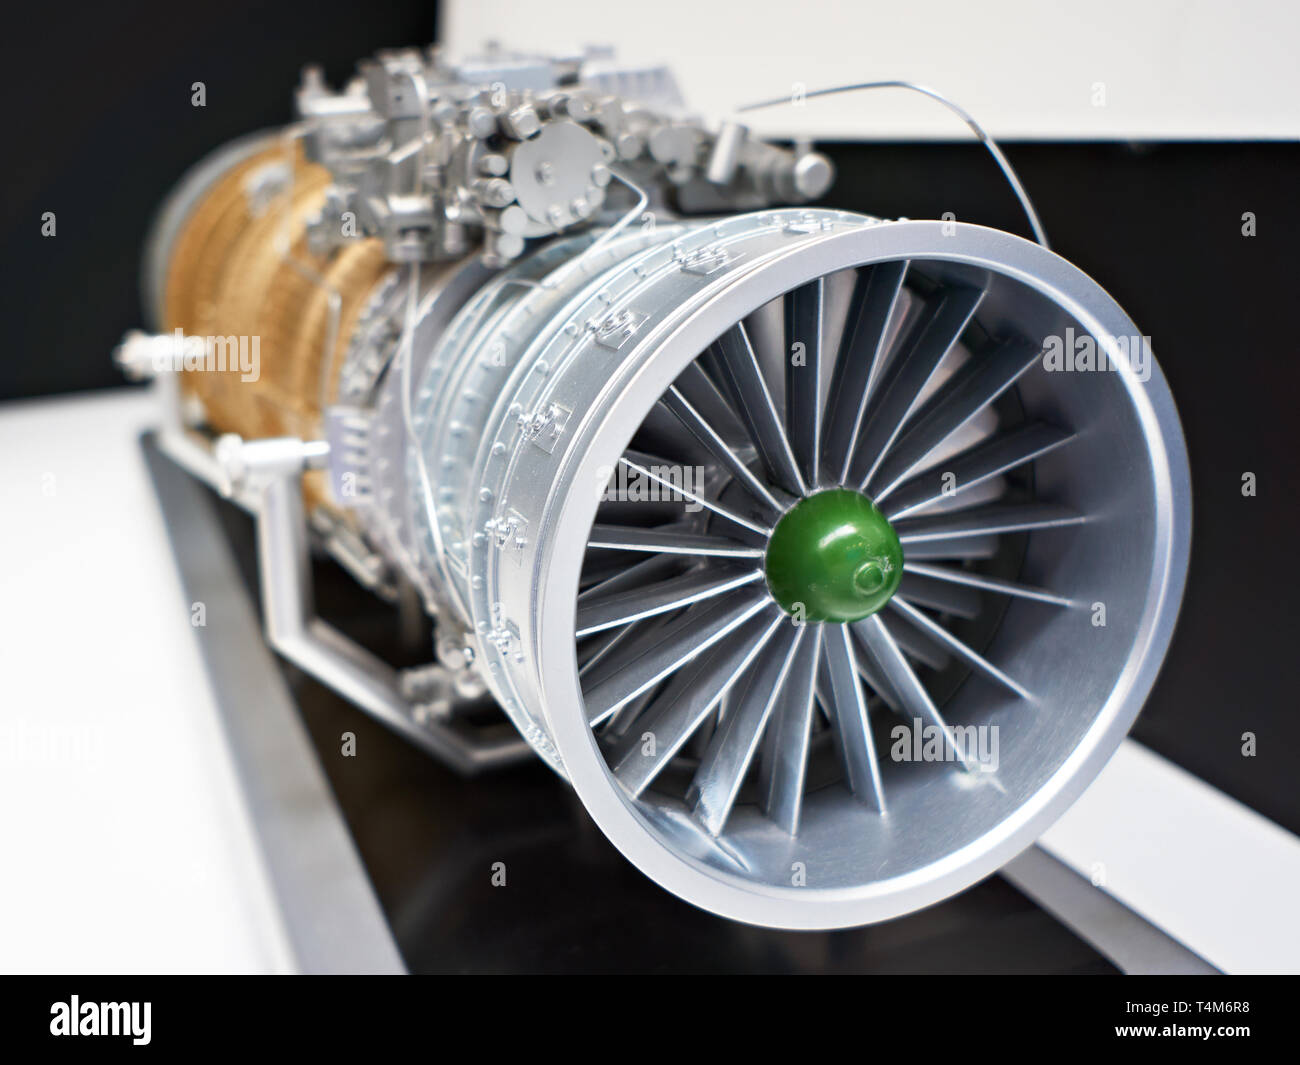 Turbojet engine for military aircraft fighter on exhibition Stock Photo